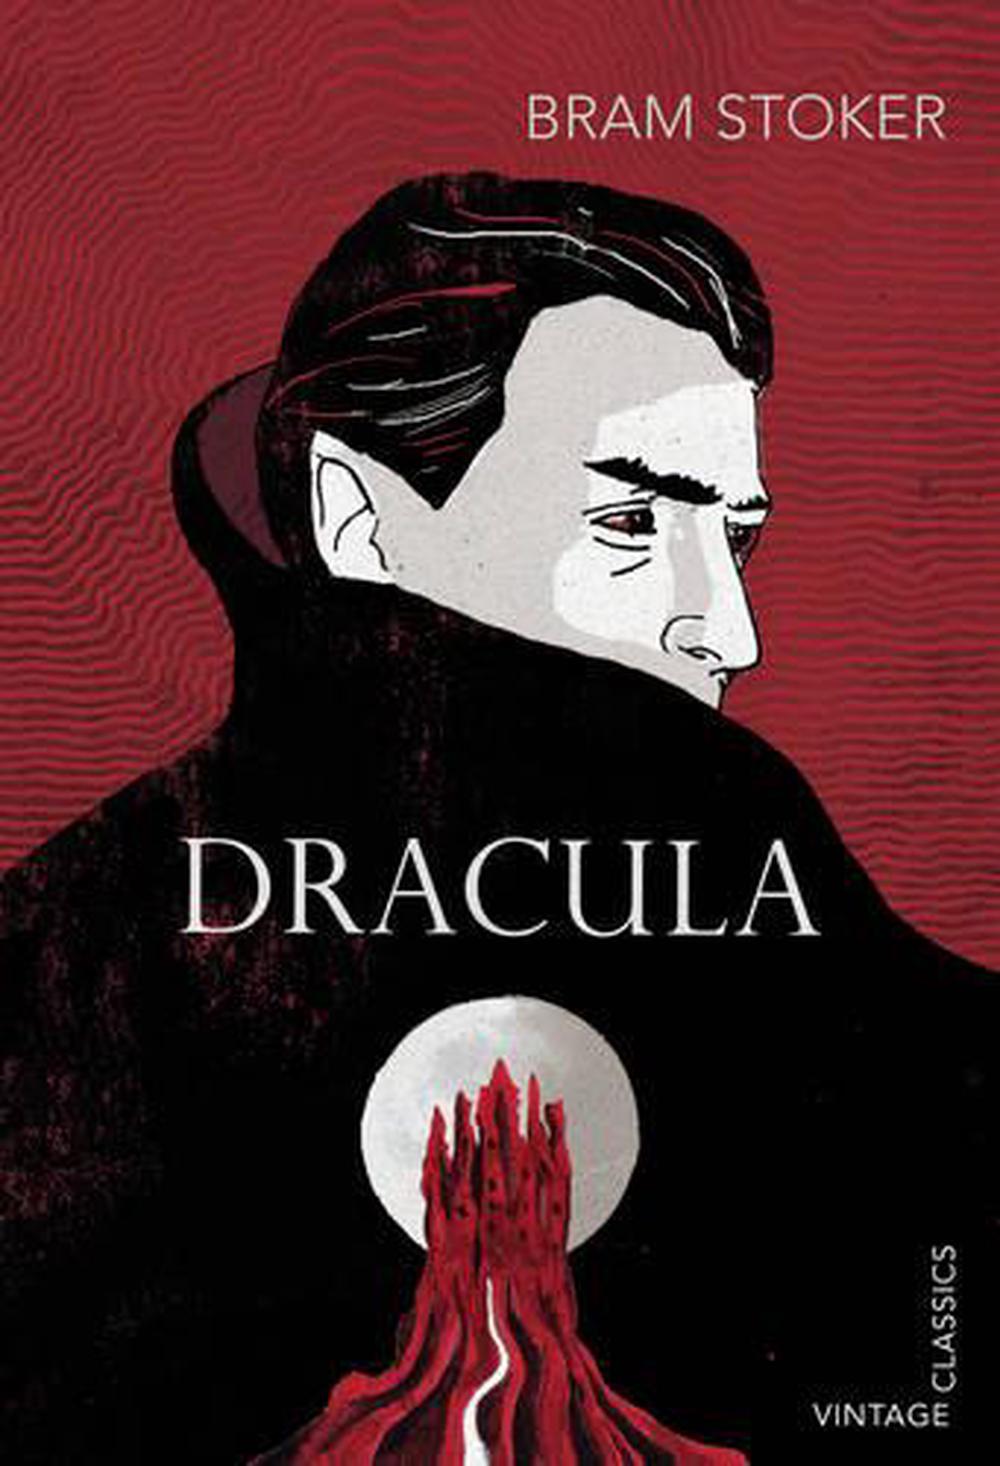 The　Bram　Stoker,　Buy　Nile　Paperback,　9780099582595　Dracula　at　by　online